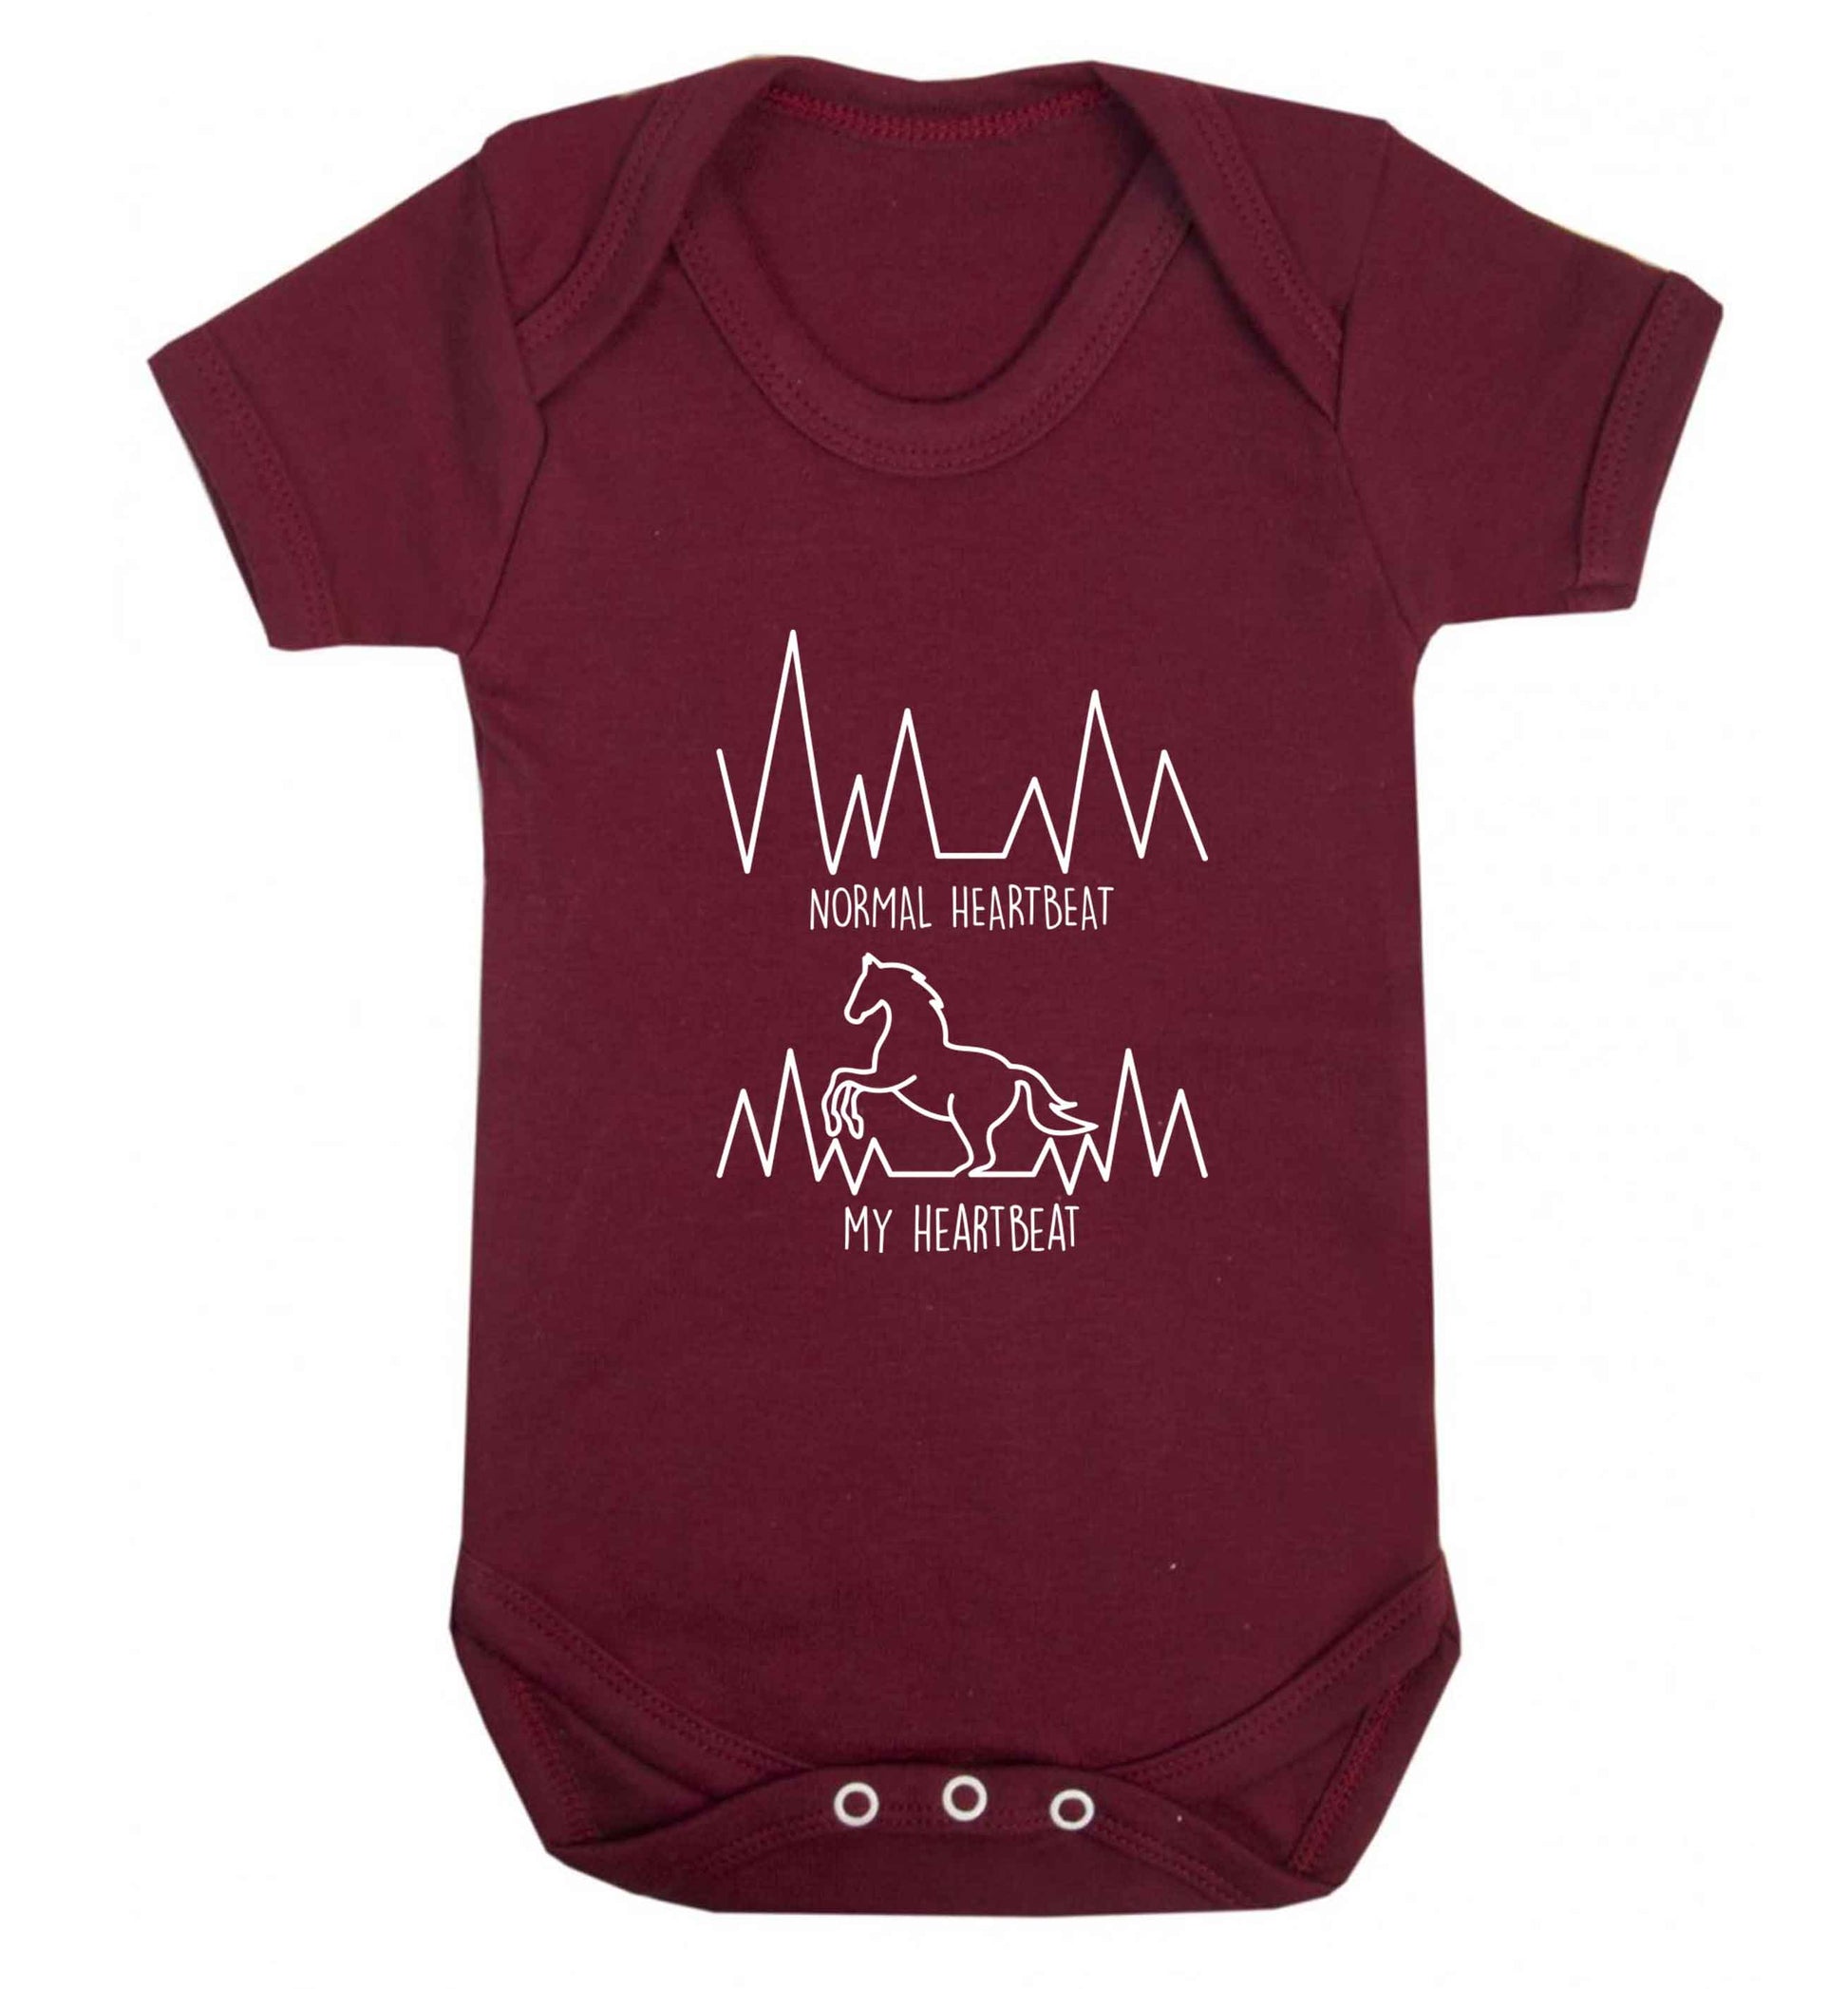 Horse - Normal heartbeat my heartbeat baby vest maroon 18-24 months